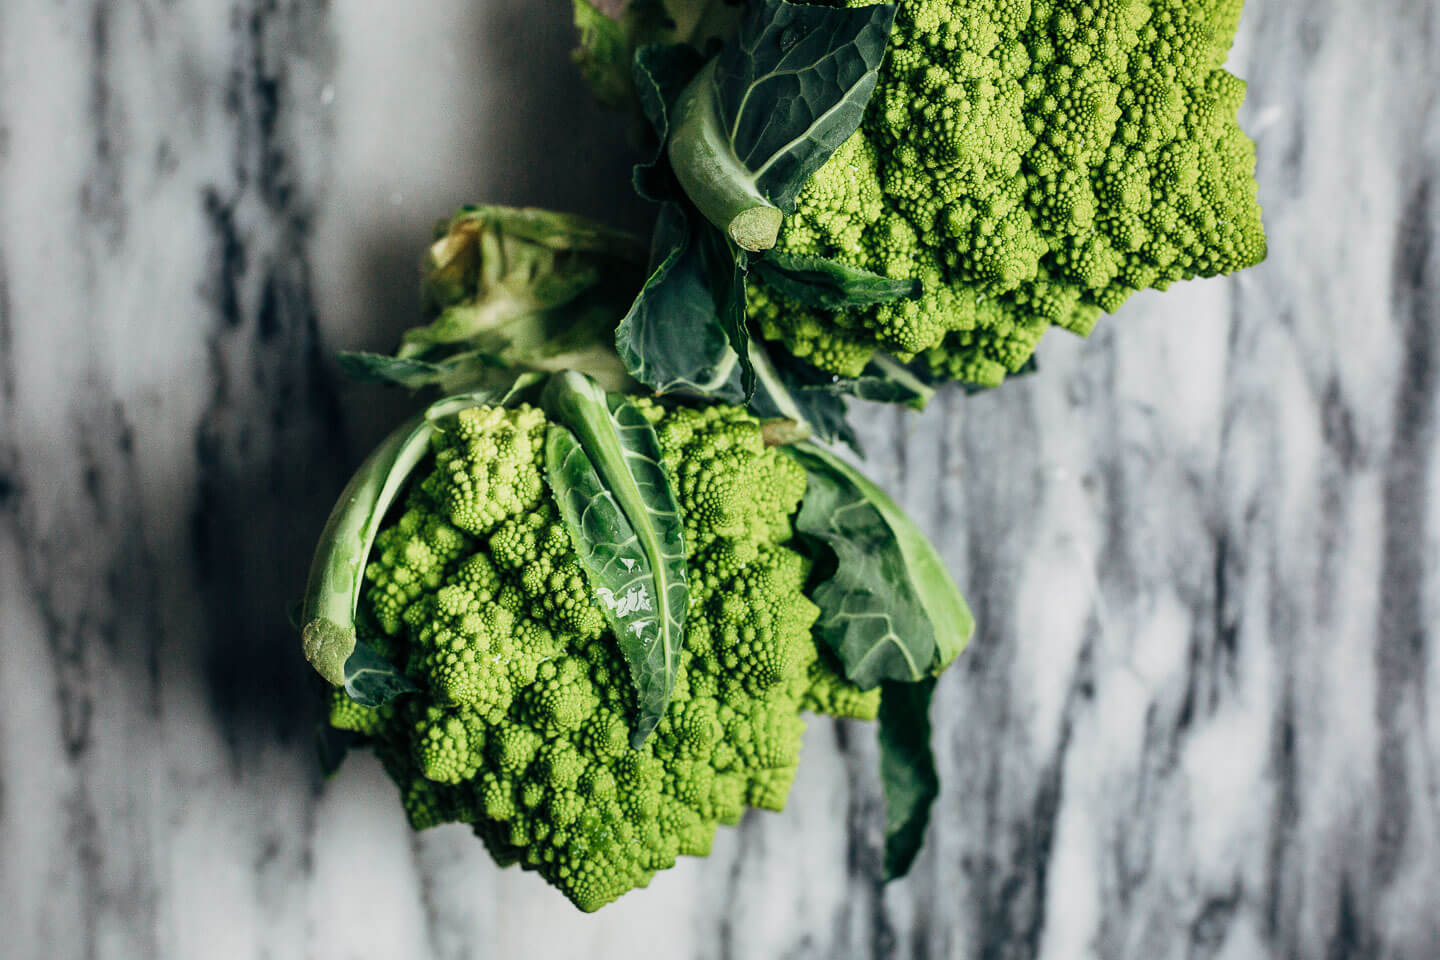 Keep winter eating interesting with this Whole30-compliant recipe for roasted Romanesco broccoli paired with a creamy vegan sunflower seed dressing made with soaked sunflower seeds and fresh Meyer lemons.